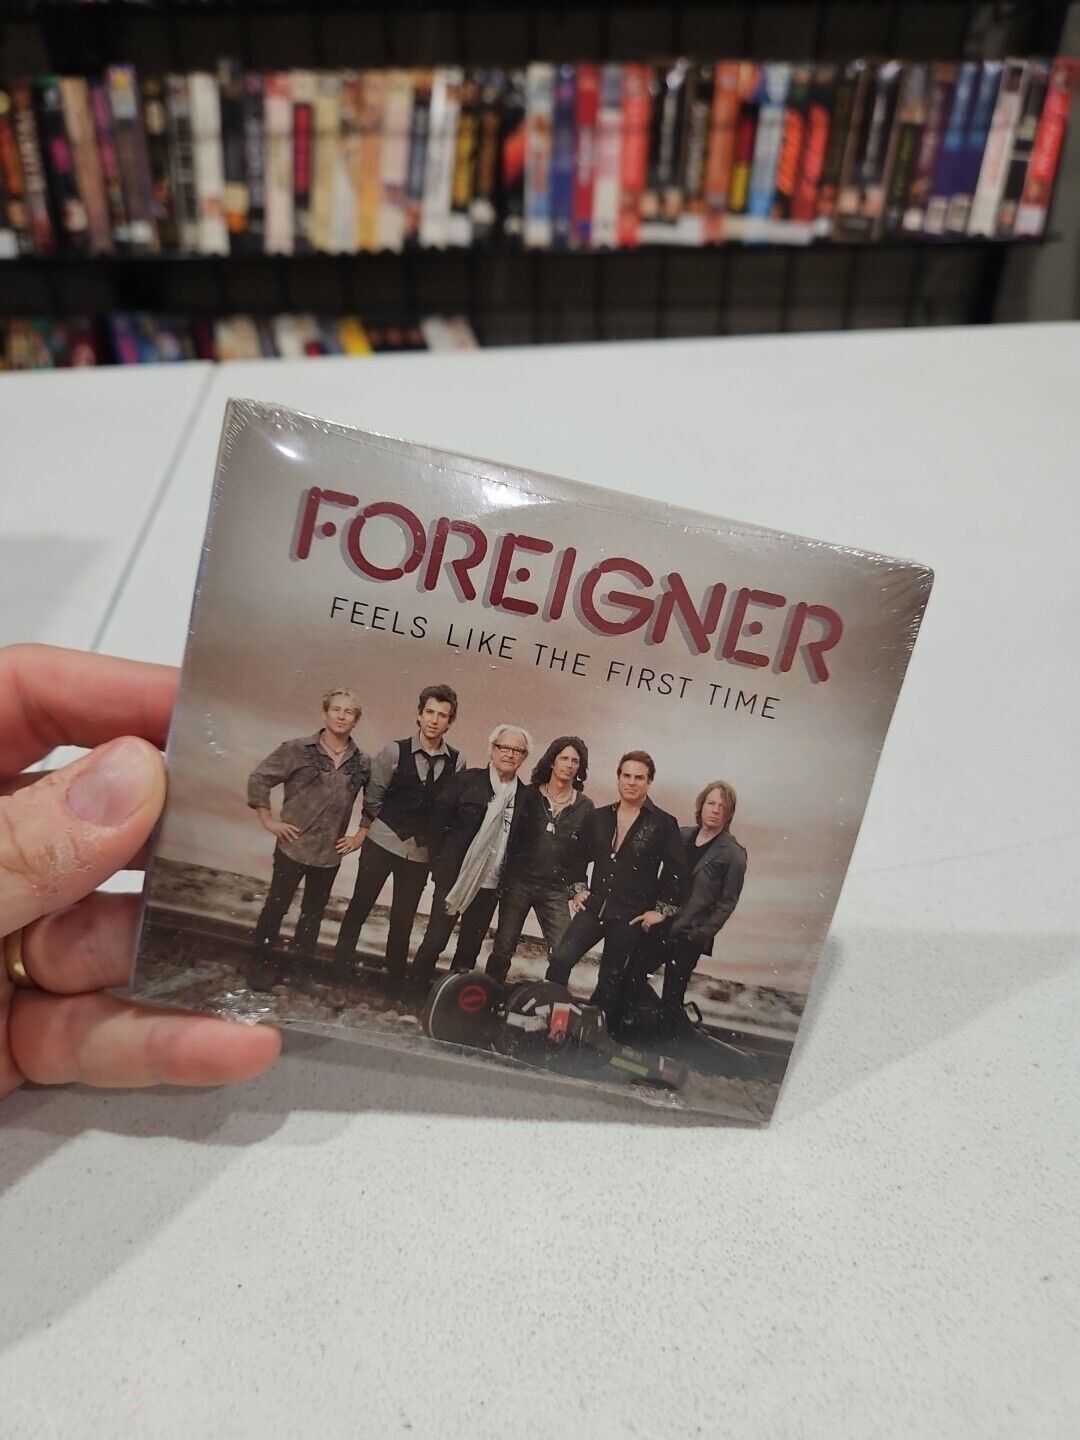 *UNOPENED* Feels Like the First Time [Digipak] by Foreigner (CD, 2011, 💿 🇺🇸 